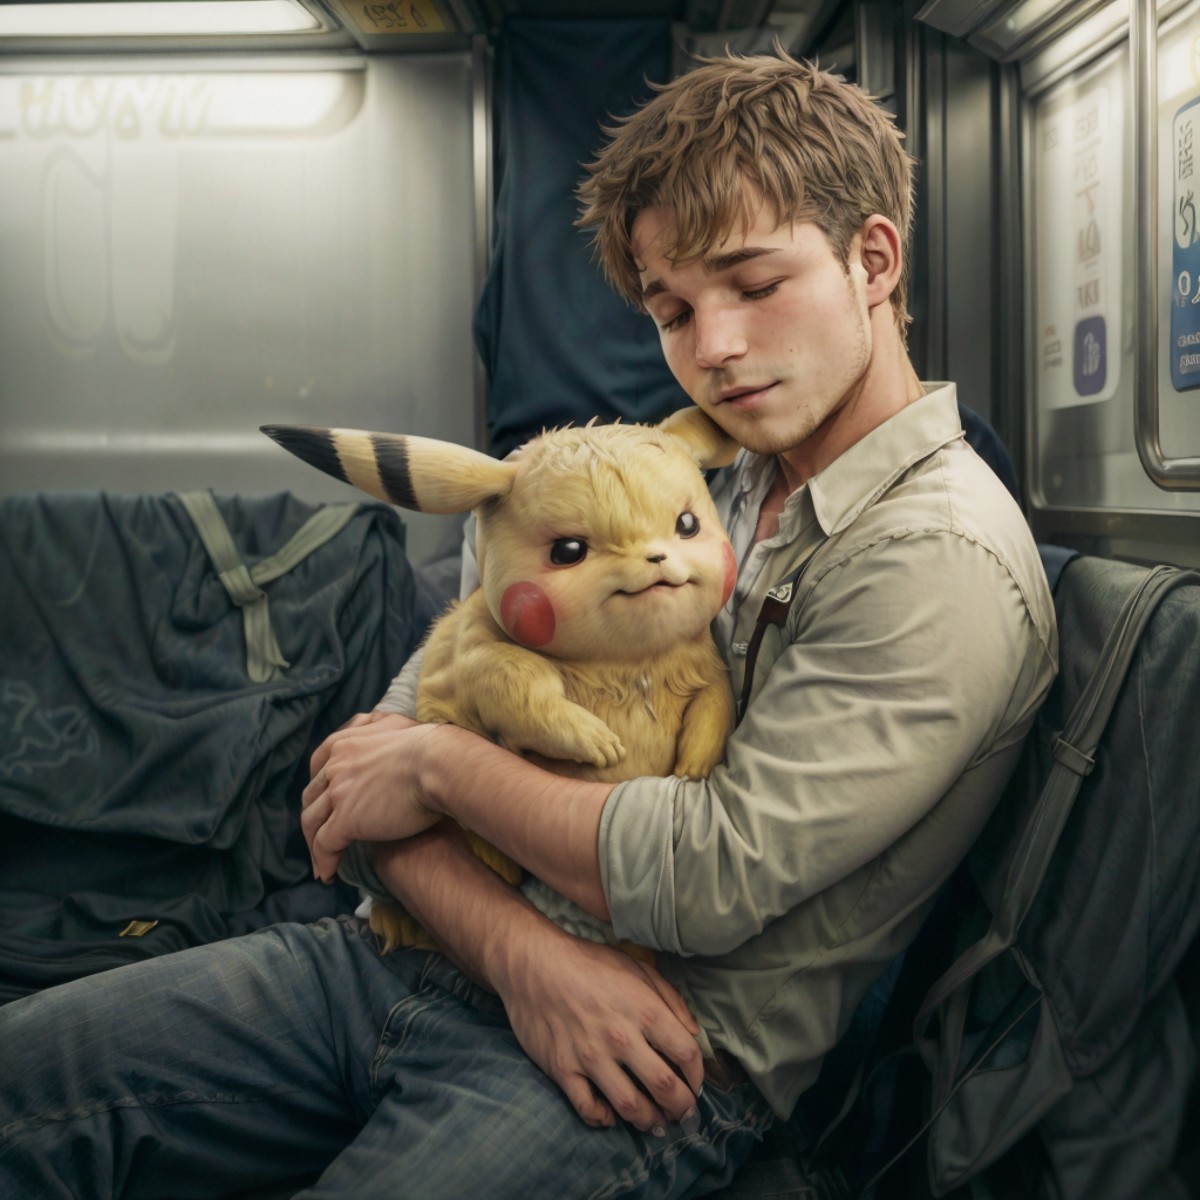 duo focus, (Sleeping 25yo slim male dg_ShawnPyfrom) sitting in empty subway train, (holding in his lap a real living sleep...